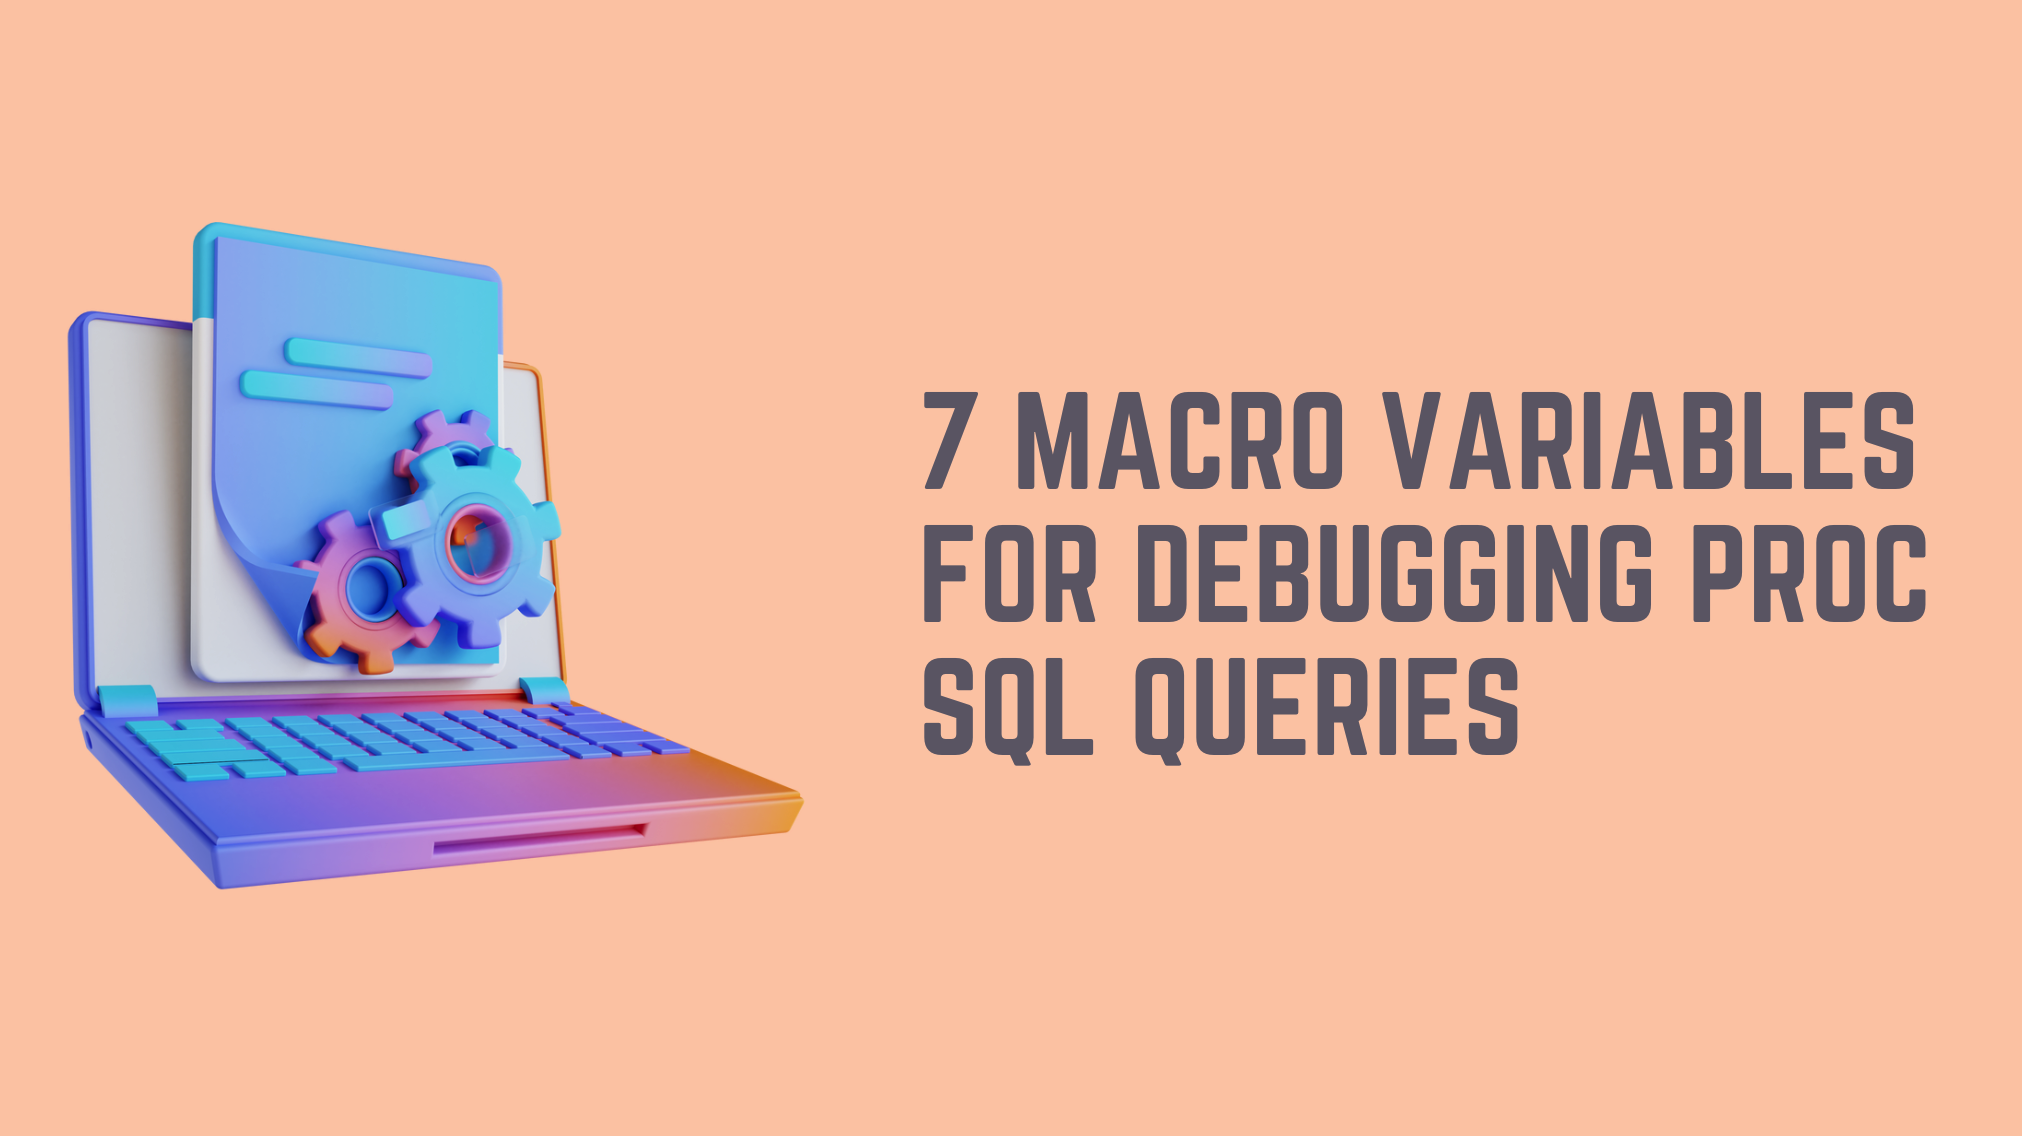 Top 7 Tips to Troubleshoot Your Proc SQL Code Like a Pro